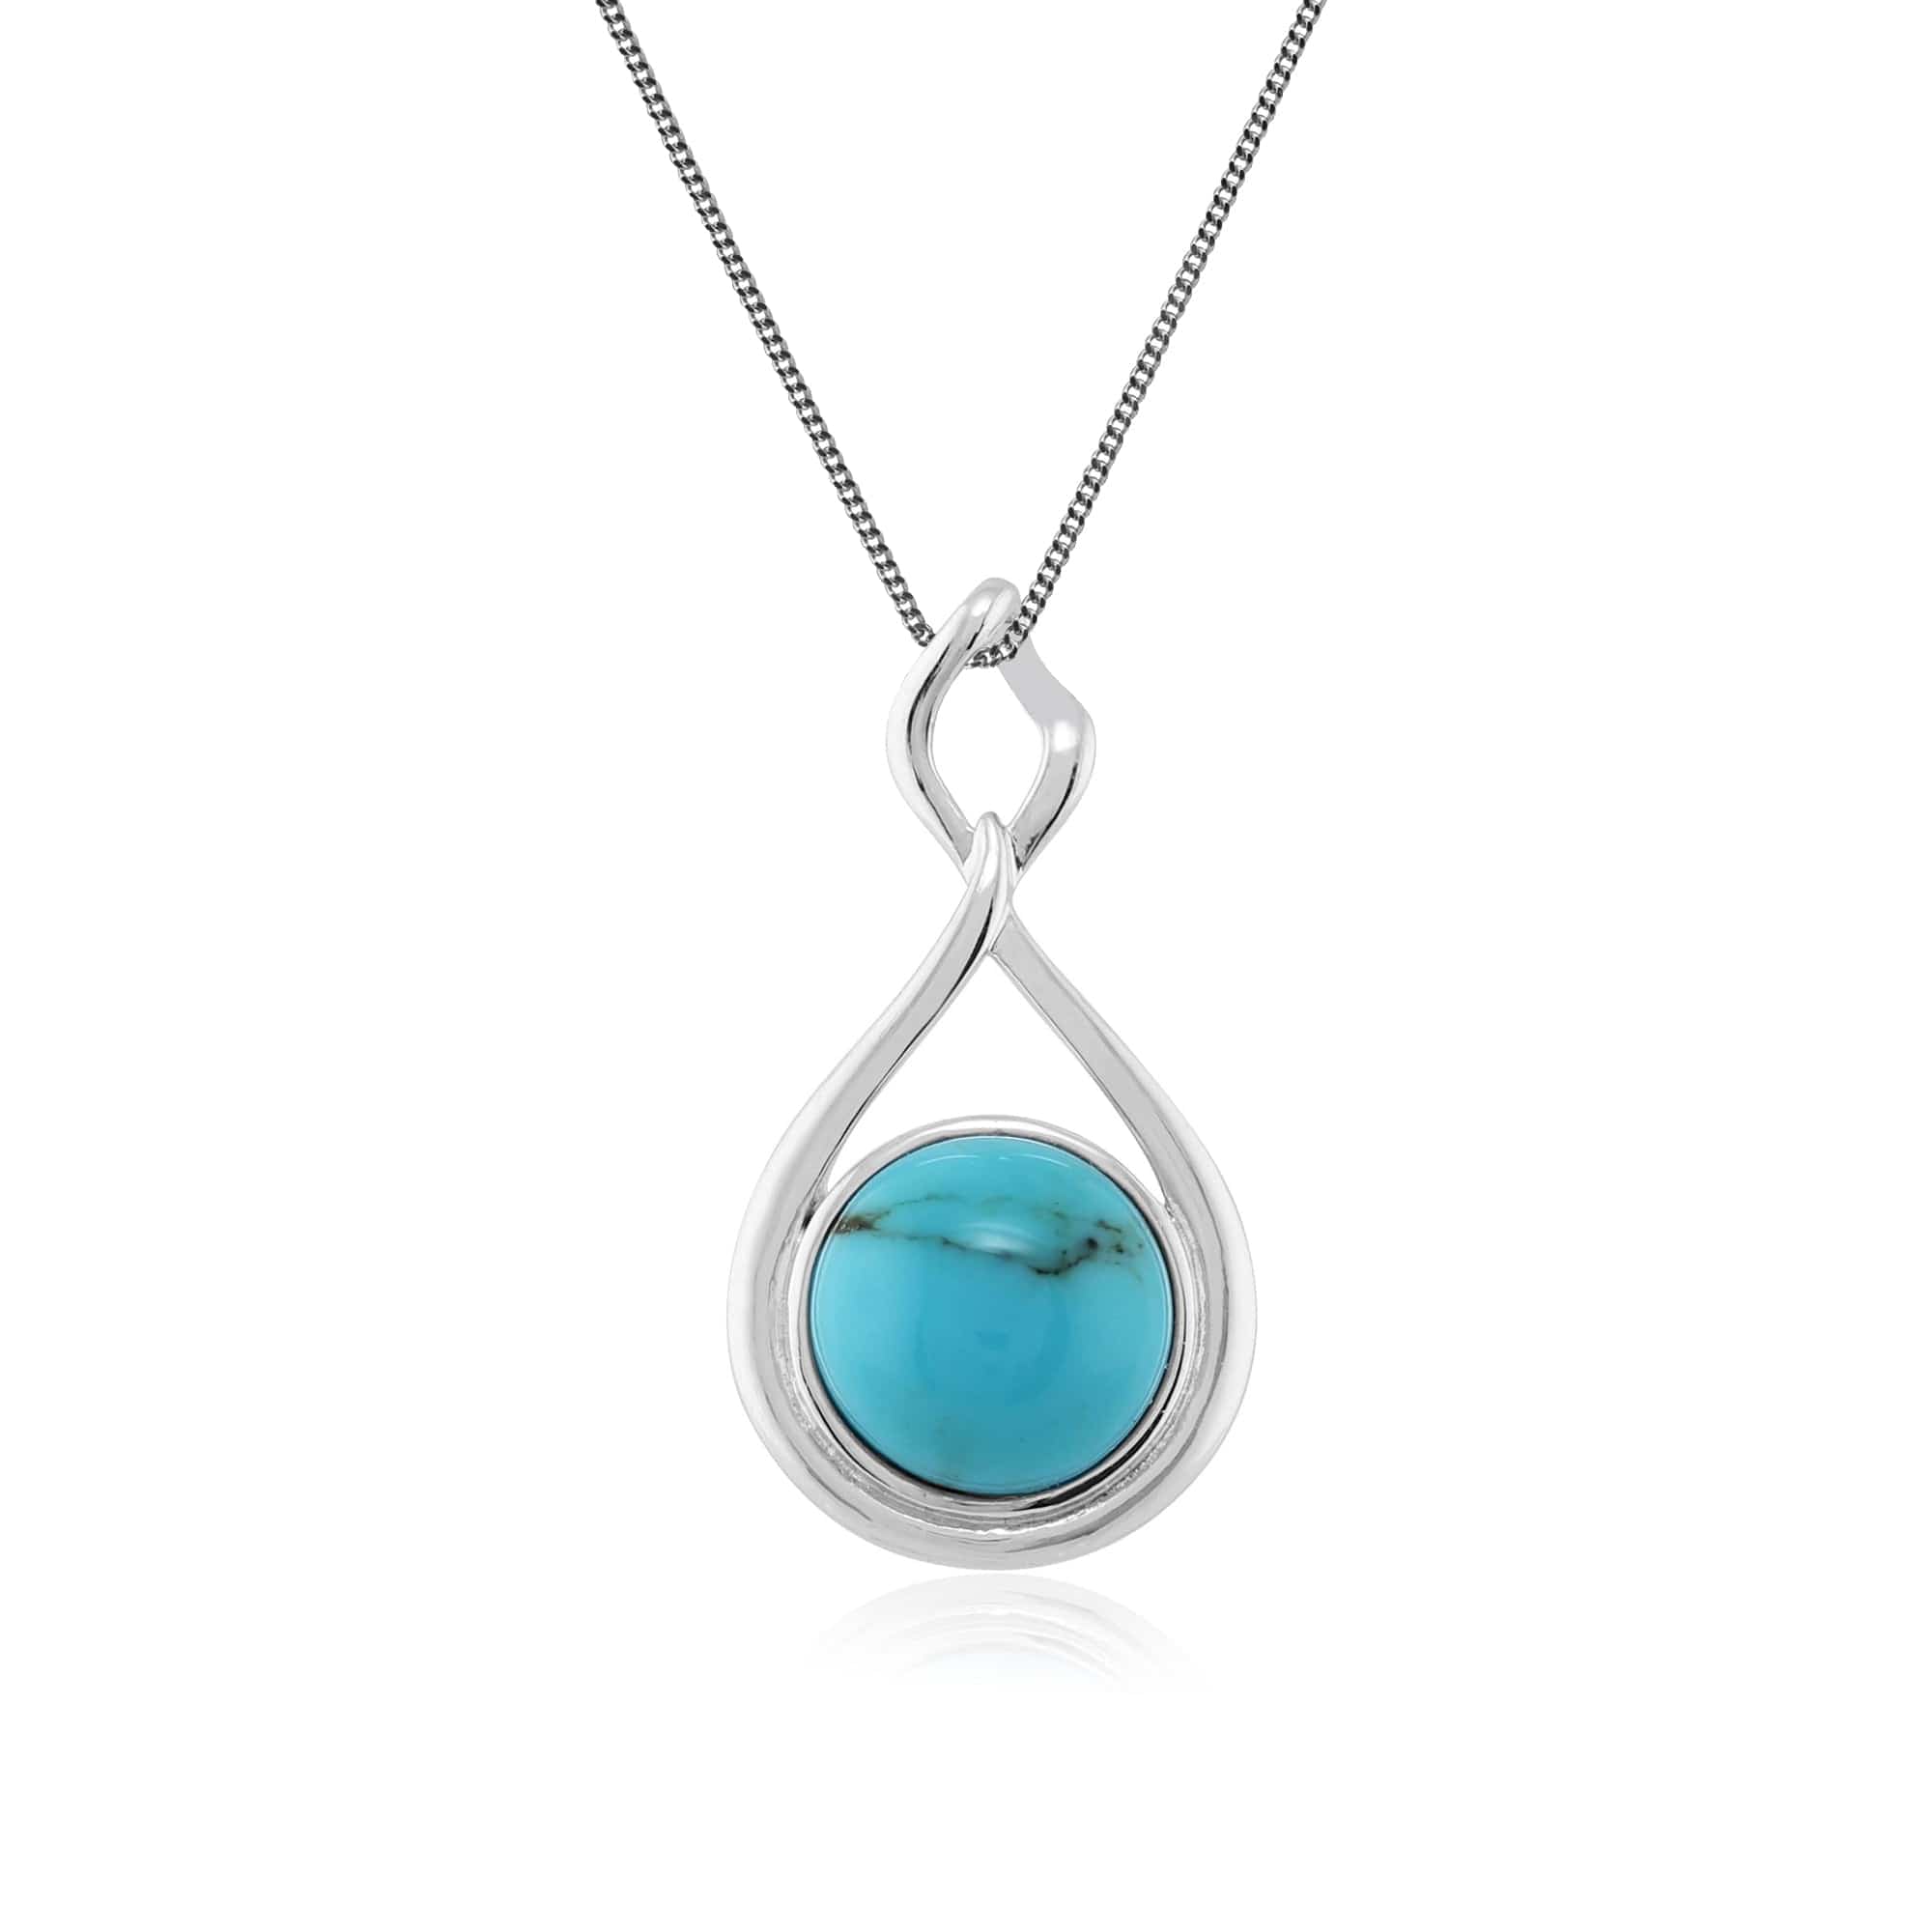 Modern Round Turquoise Cabochon Pendant in 925 Sterling Silver - Gemondo